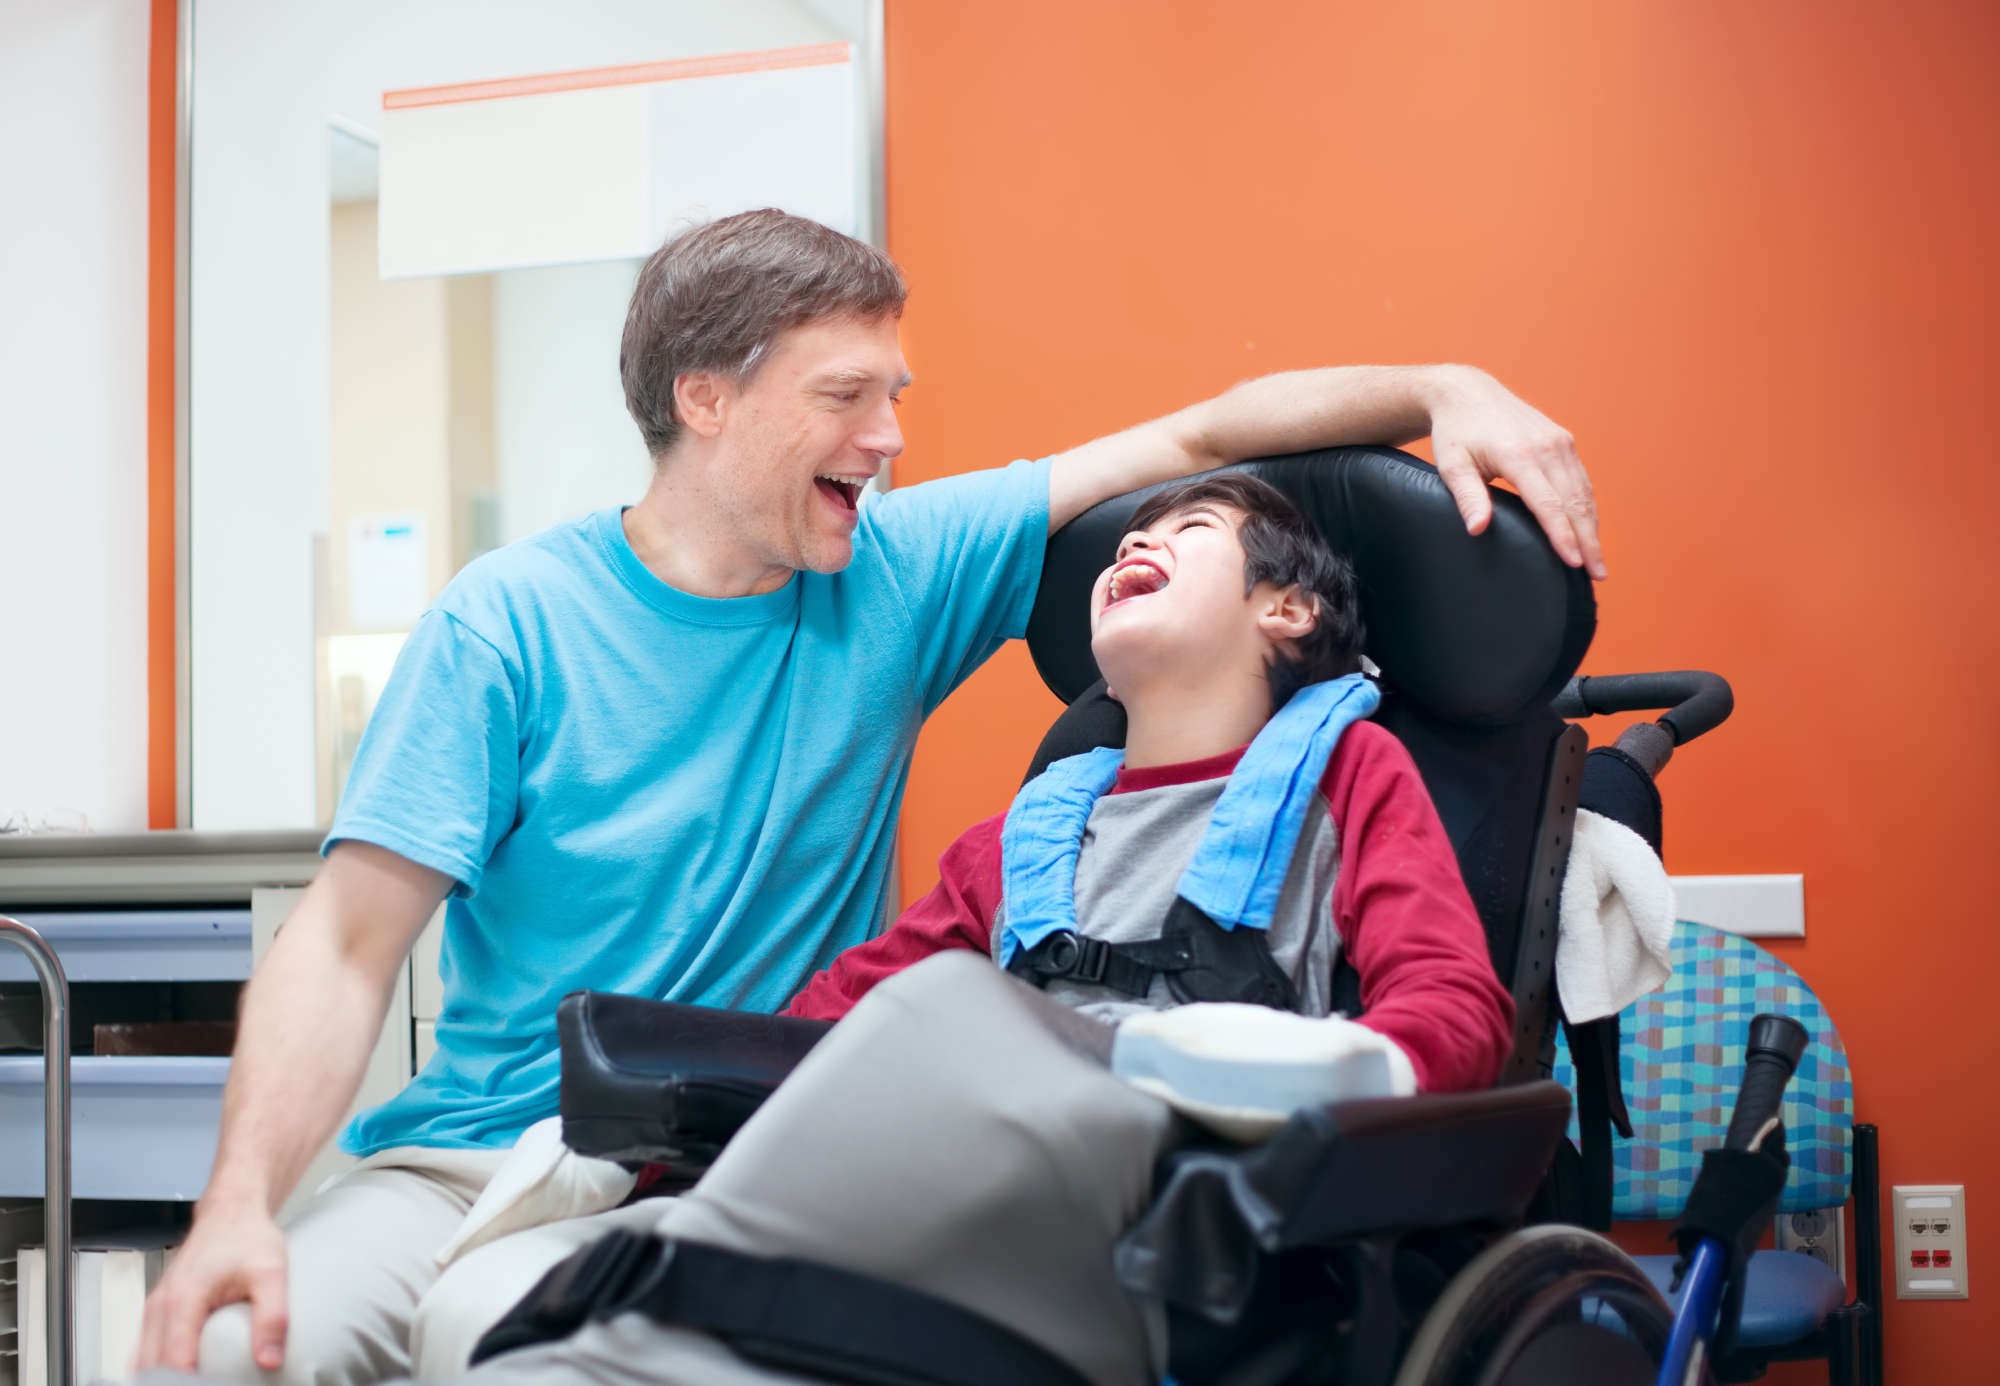 A young disabled boy in a wheelchair laughing with his male carer beside him